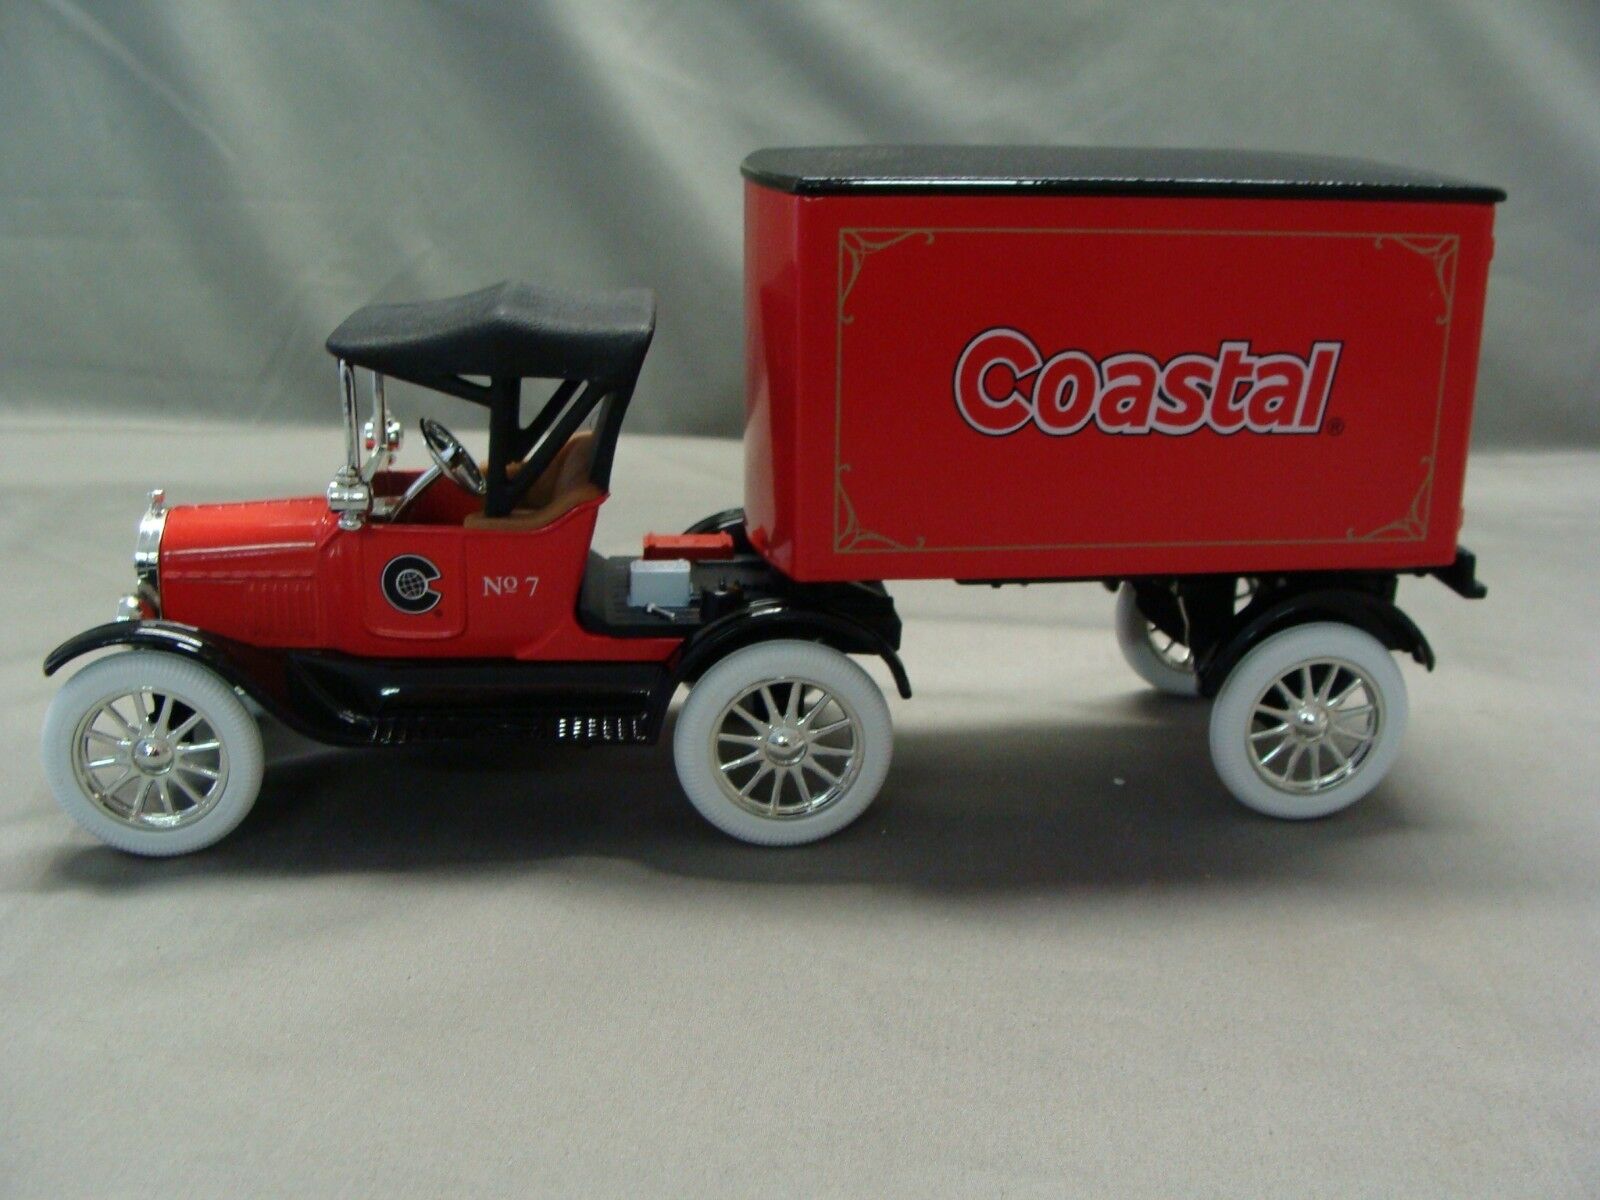 Coastal 1918 Ford Runabout Tractor Trailer Toy Bank, 1999 Ertl, Stock #19658